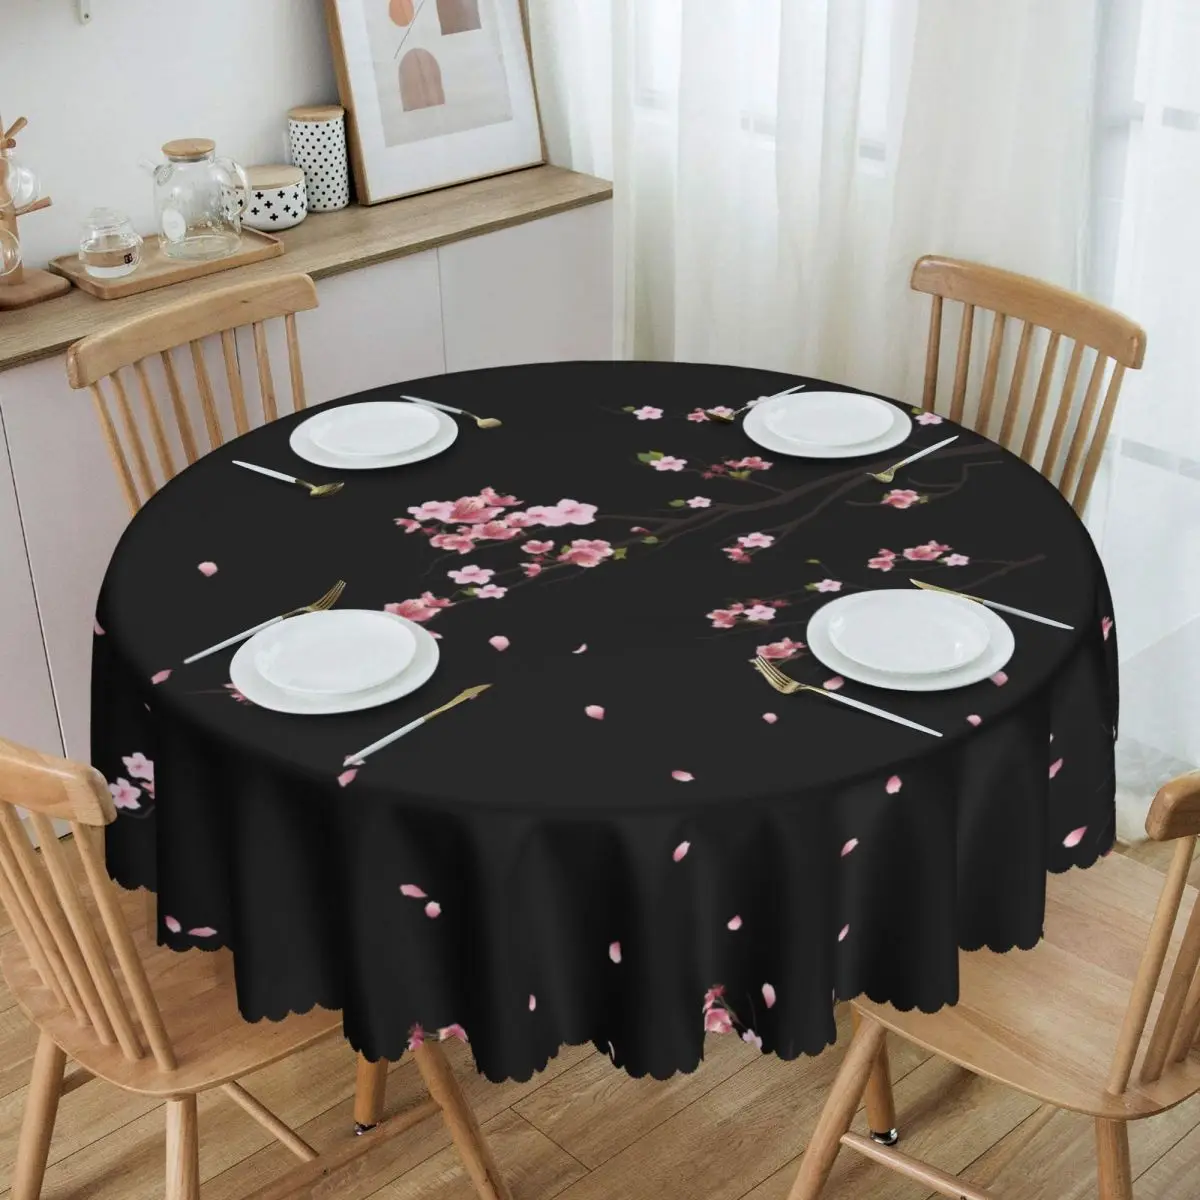 

Japanese Sakura Branch Tablecloth Round Waterproof Flowers Floral Cherry Blossom Table Cover Cloth for Banquet 60 inch